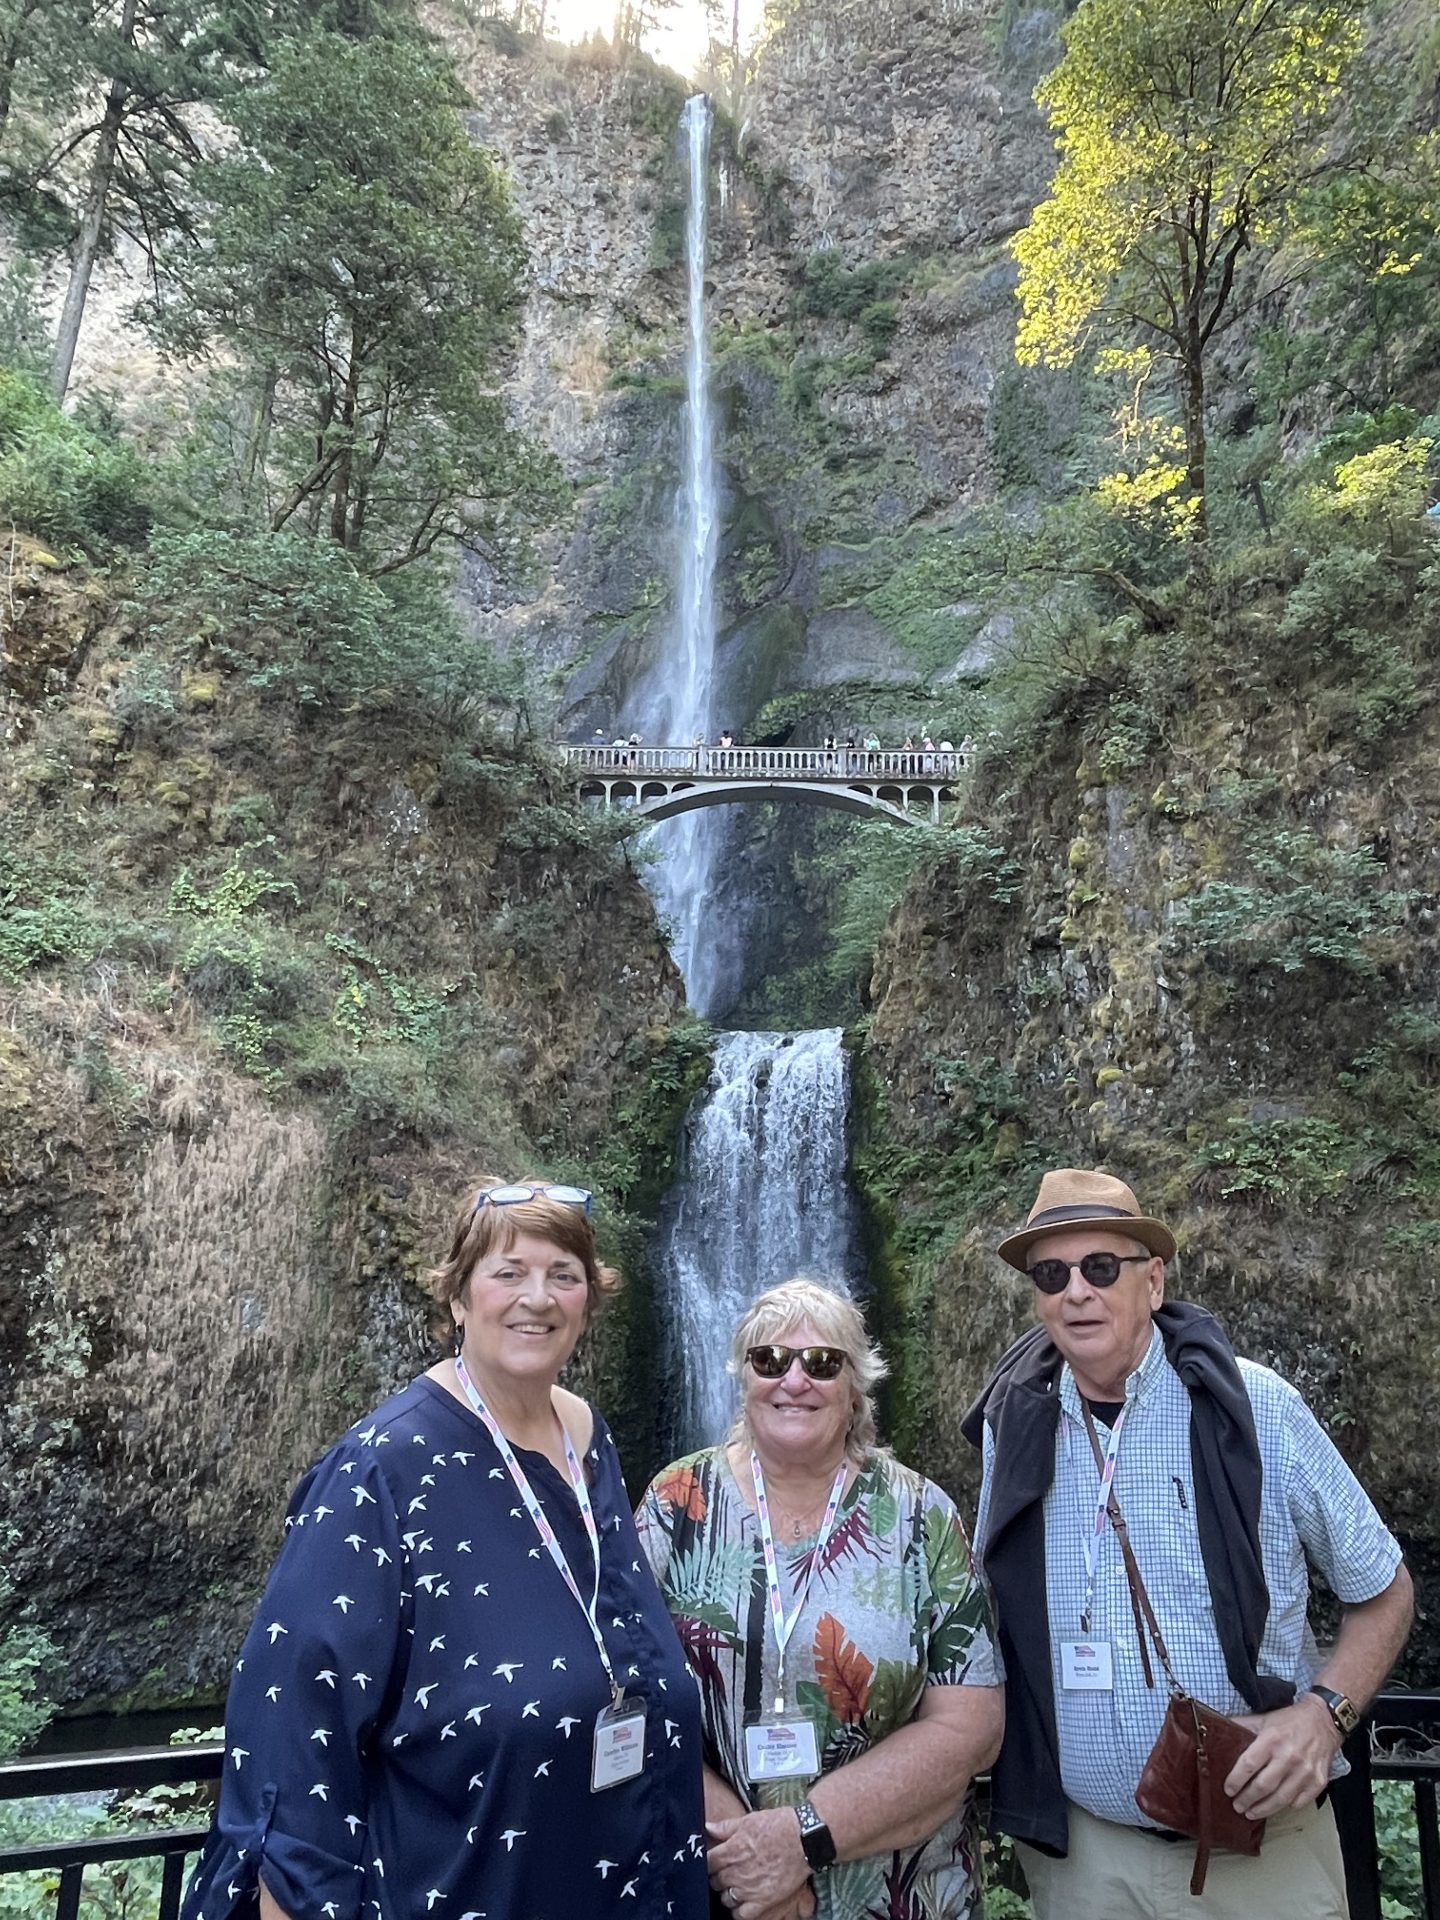 Met Kevin on the Snake River and Columbia River Gorge in August 2022 and became quick friends.  Here we are at Multnomah Falls.   We texted regularly but had not heard from him since Valentine's Day and went searching and found this obituary.   This is a sad day!